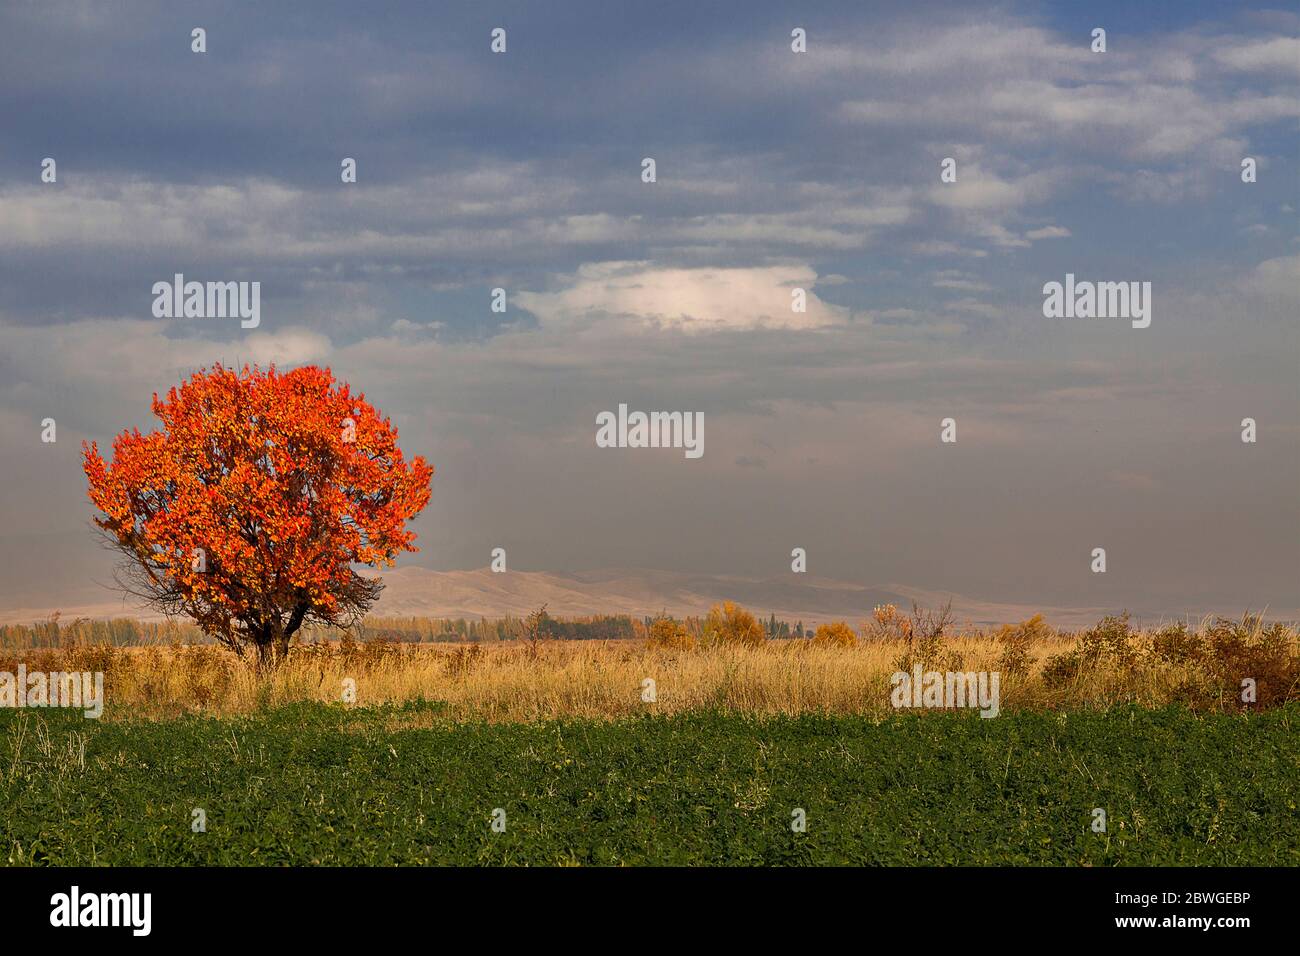 Fall colors in the agricultural fields near Bishkek in Kyrgyzstan Stock Photo